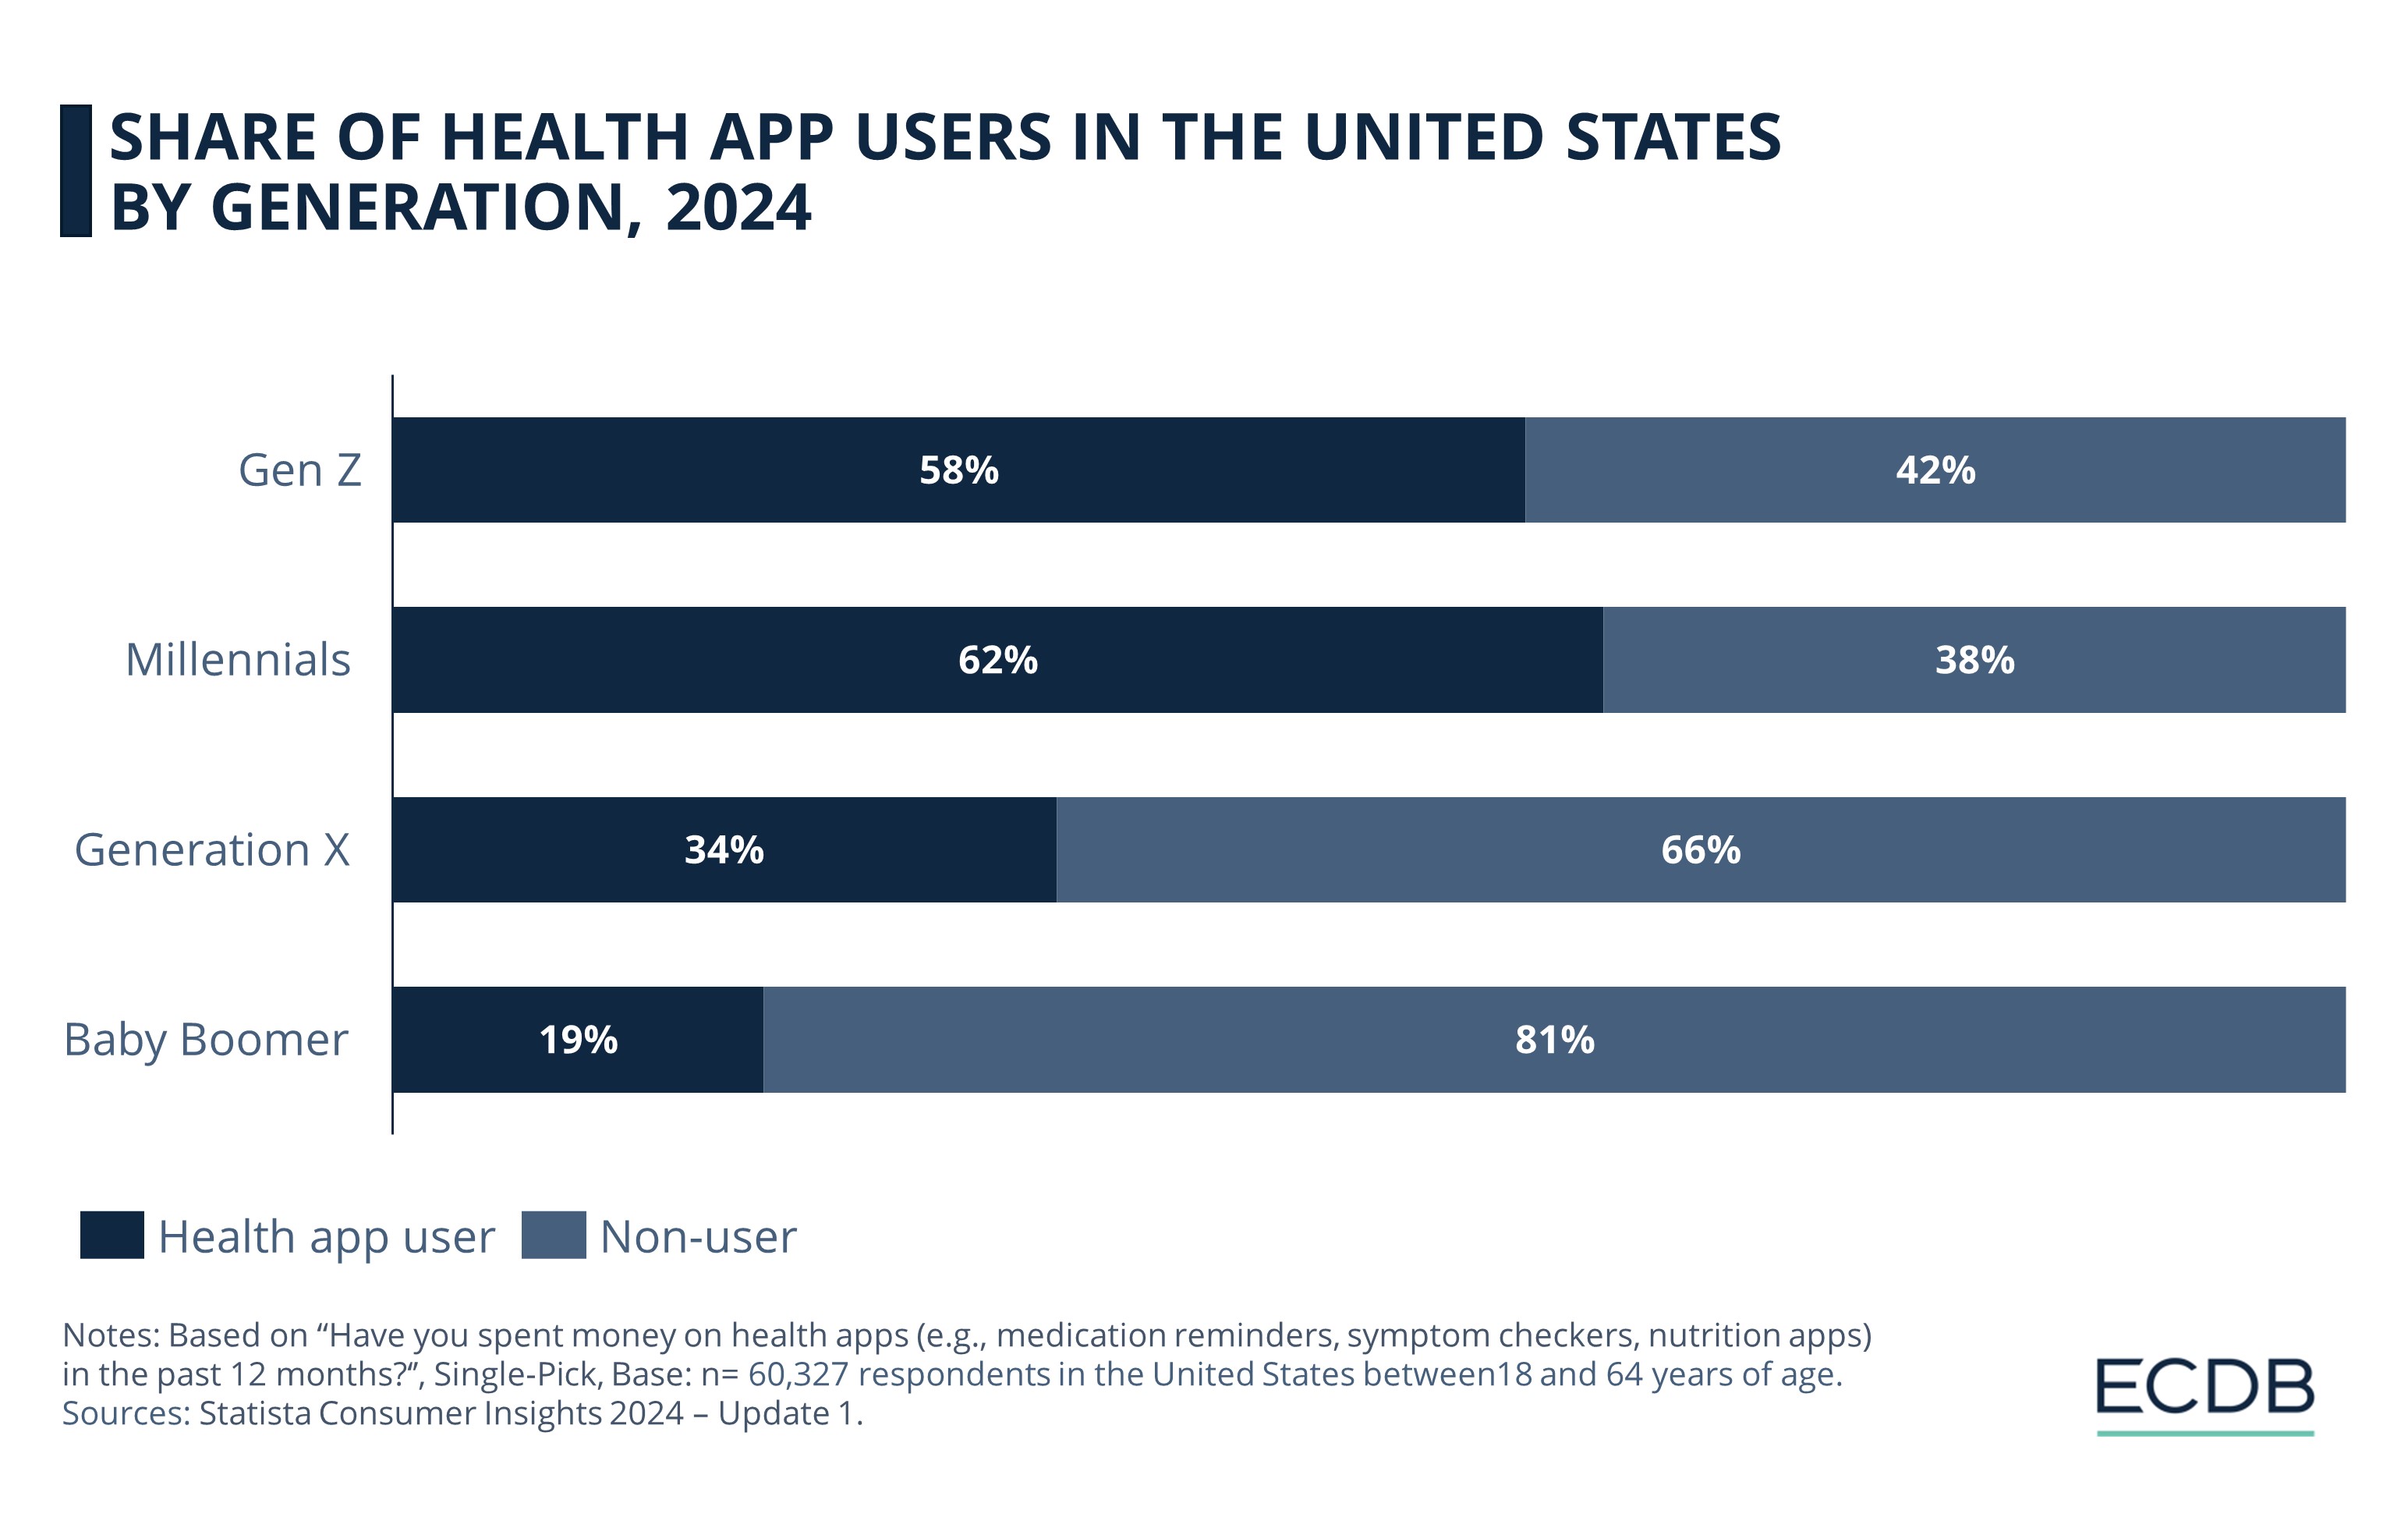 Share of Health App Users in the United States by Generation, 2024